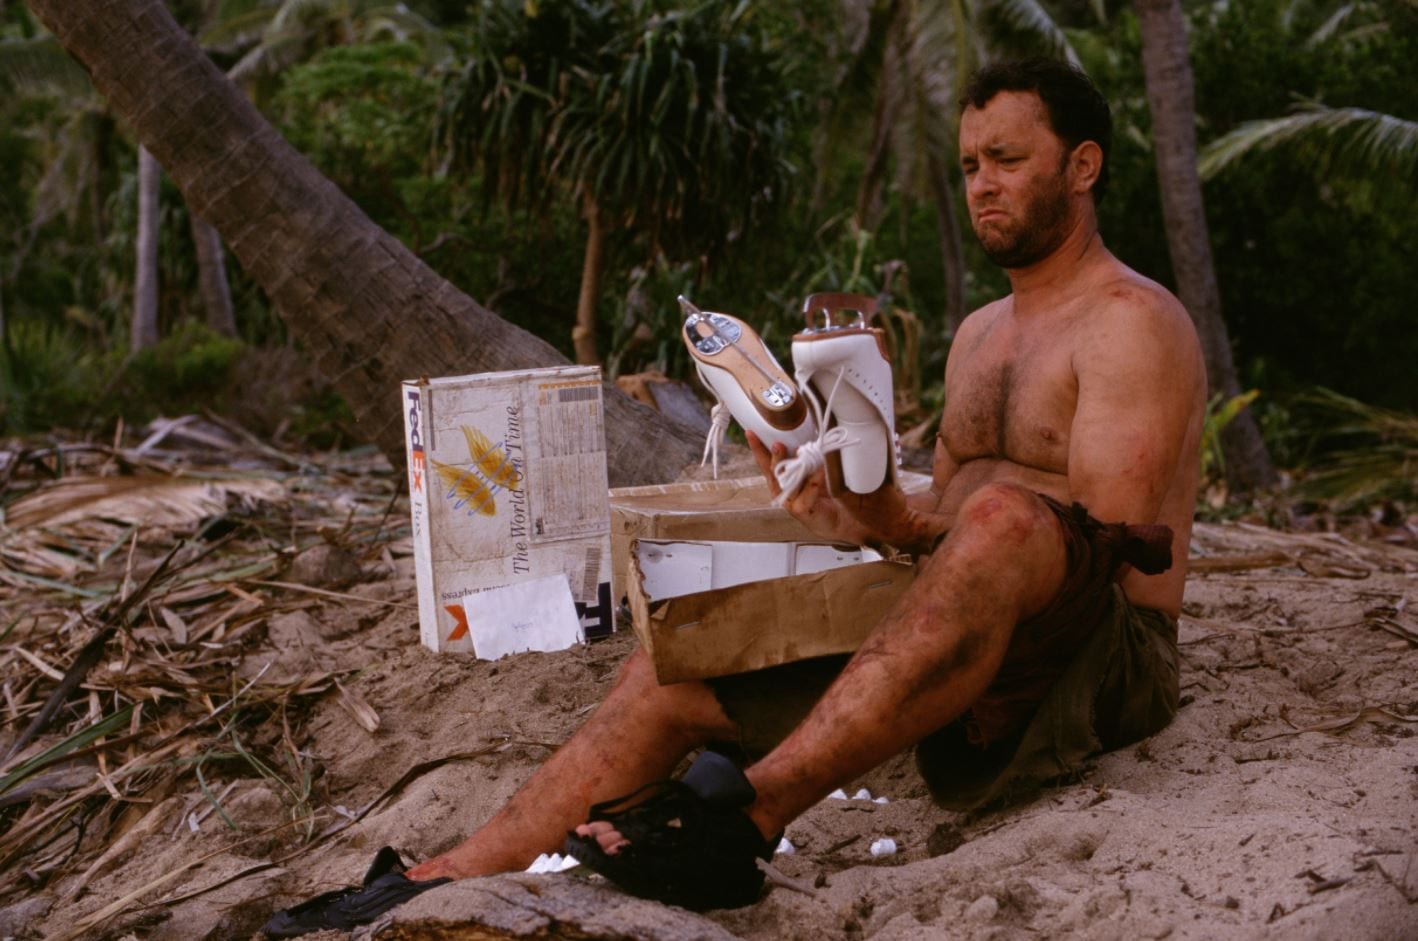 Cast Away Ending Explained: Who Does Chuck Ending With?